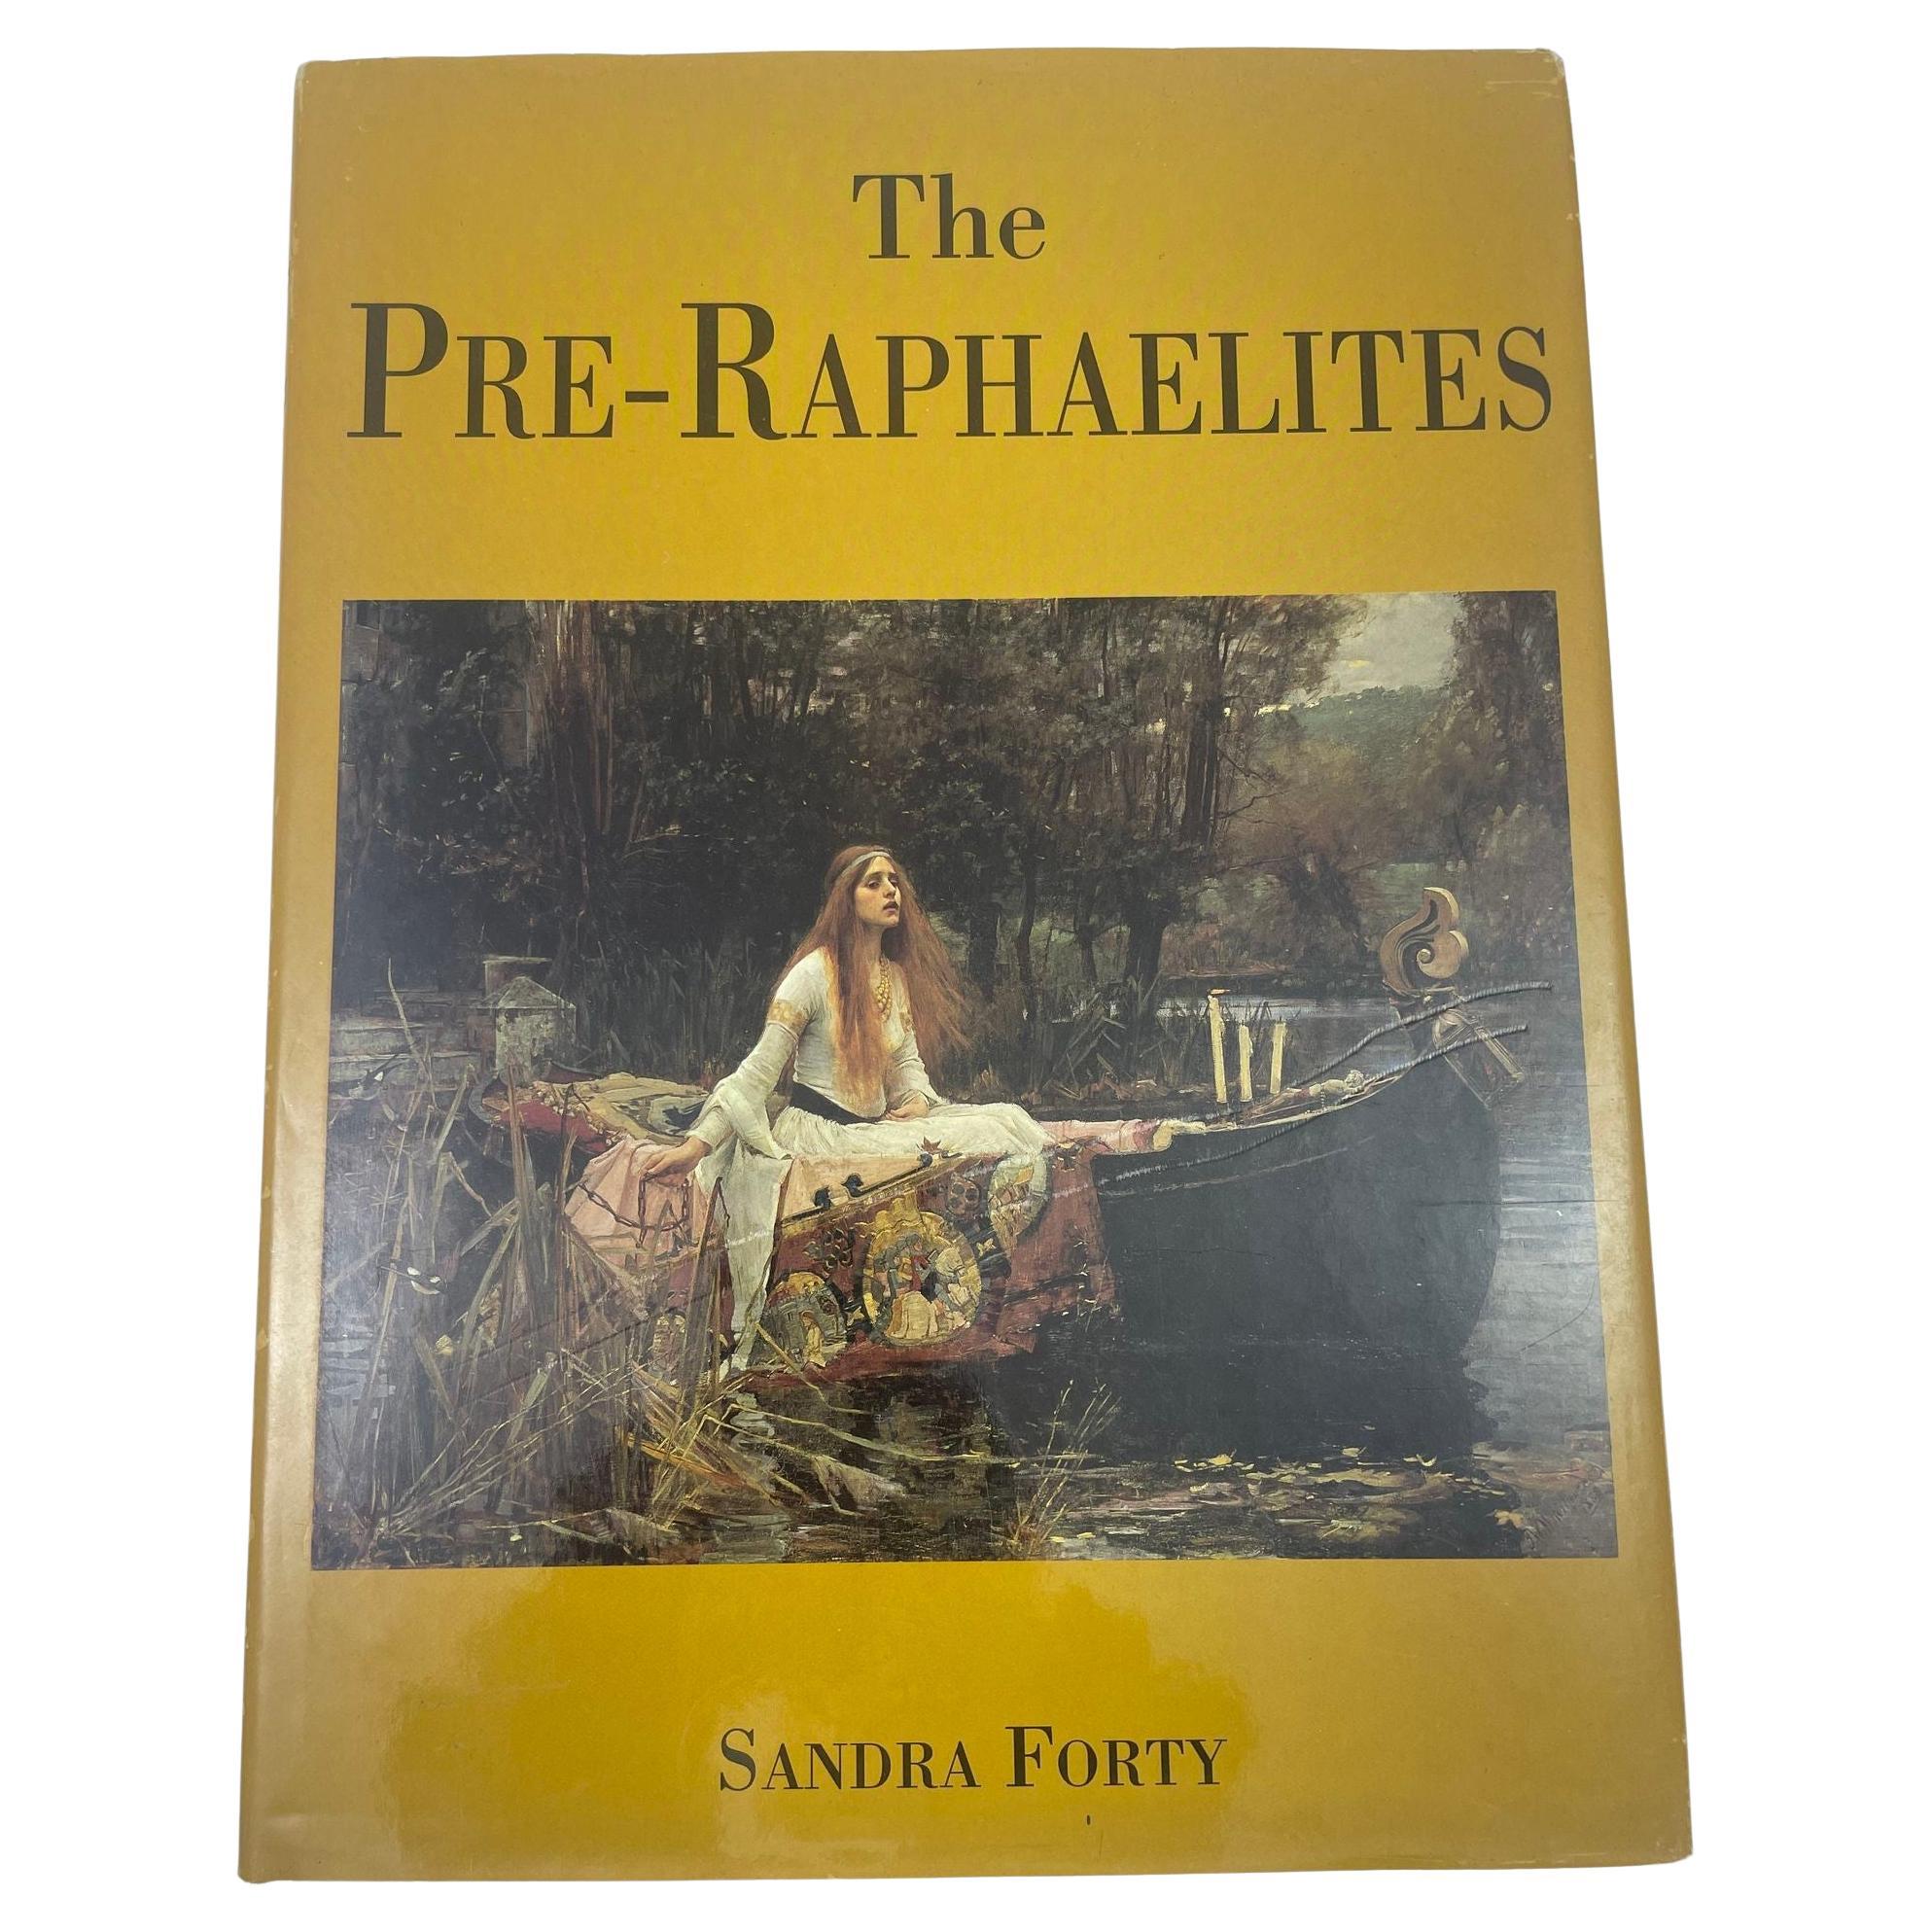 The Pre-Raphaelites by Sandra Forty Hardcover Book 1st Ed. 1997 For Sale